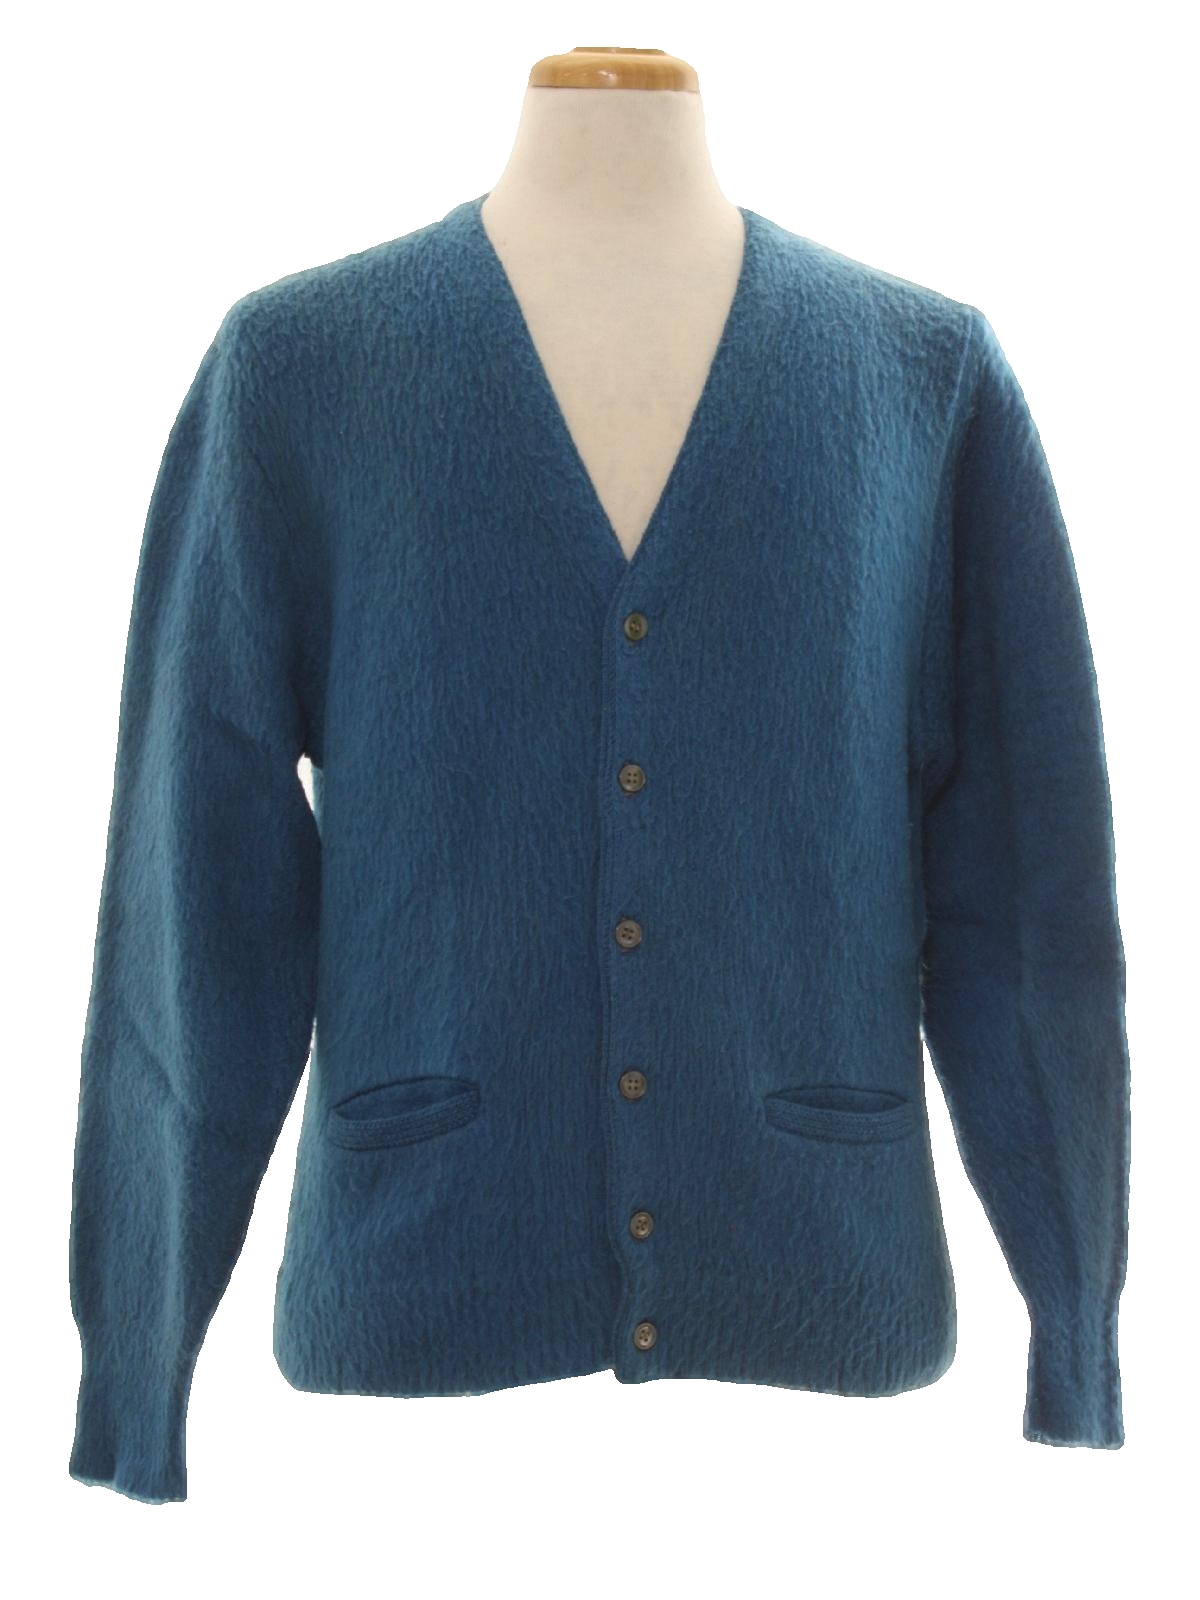 Vintage 1960's Caridgan Sweater: 60s -Picadilly- Mens blue background ...